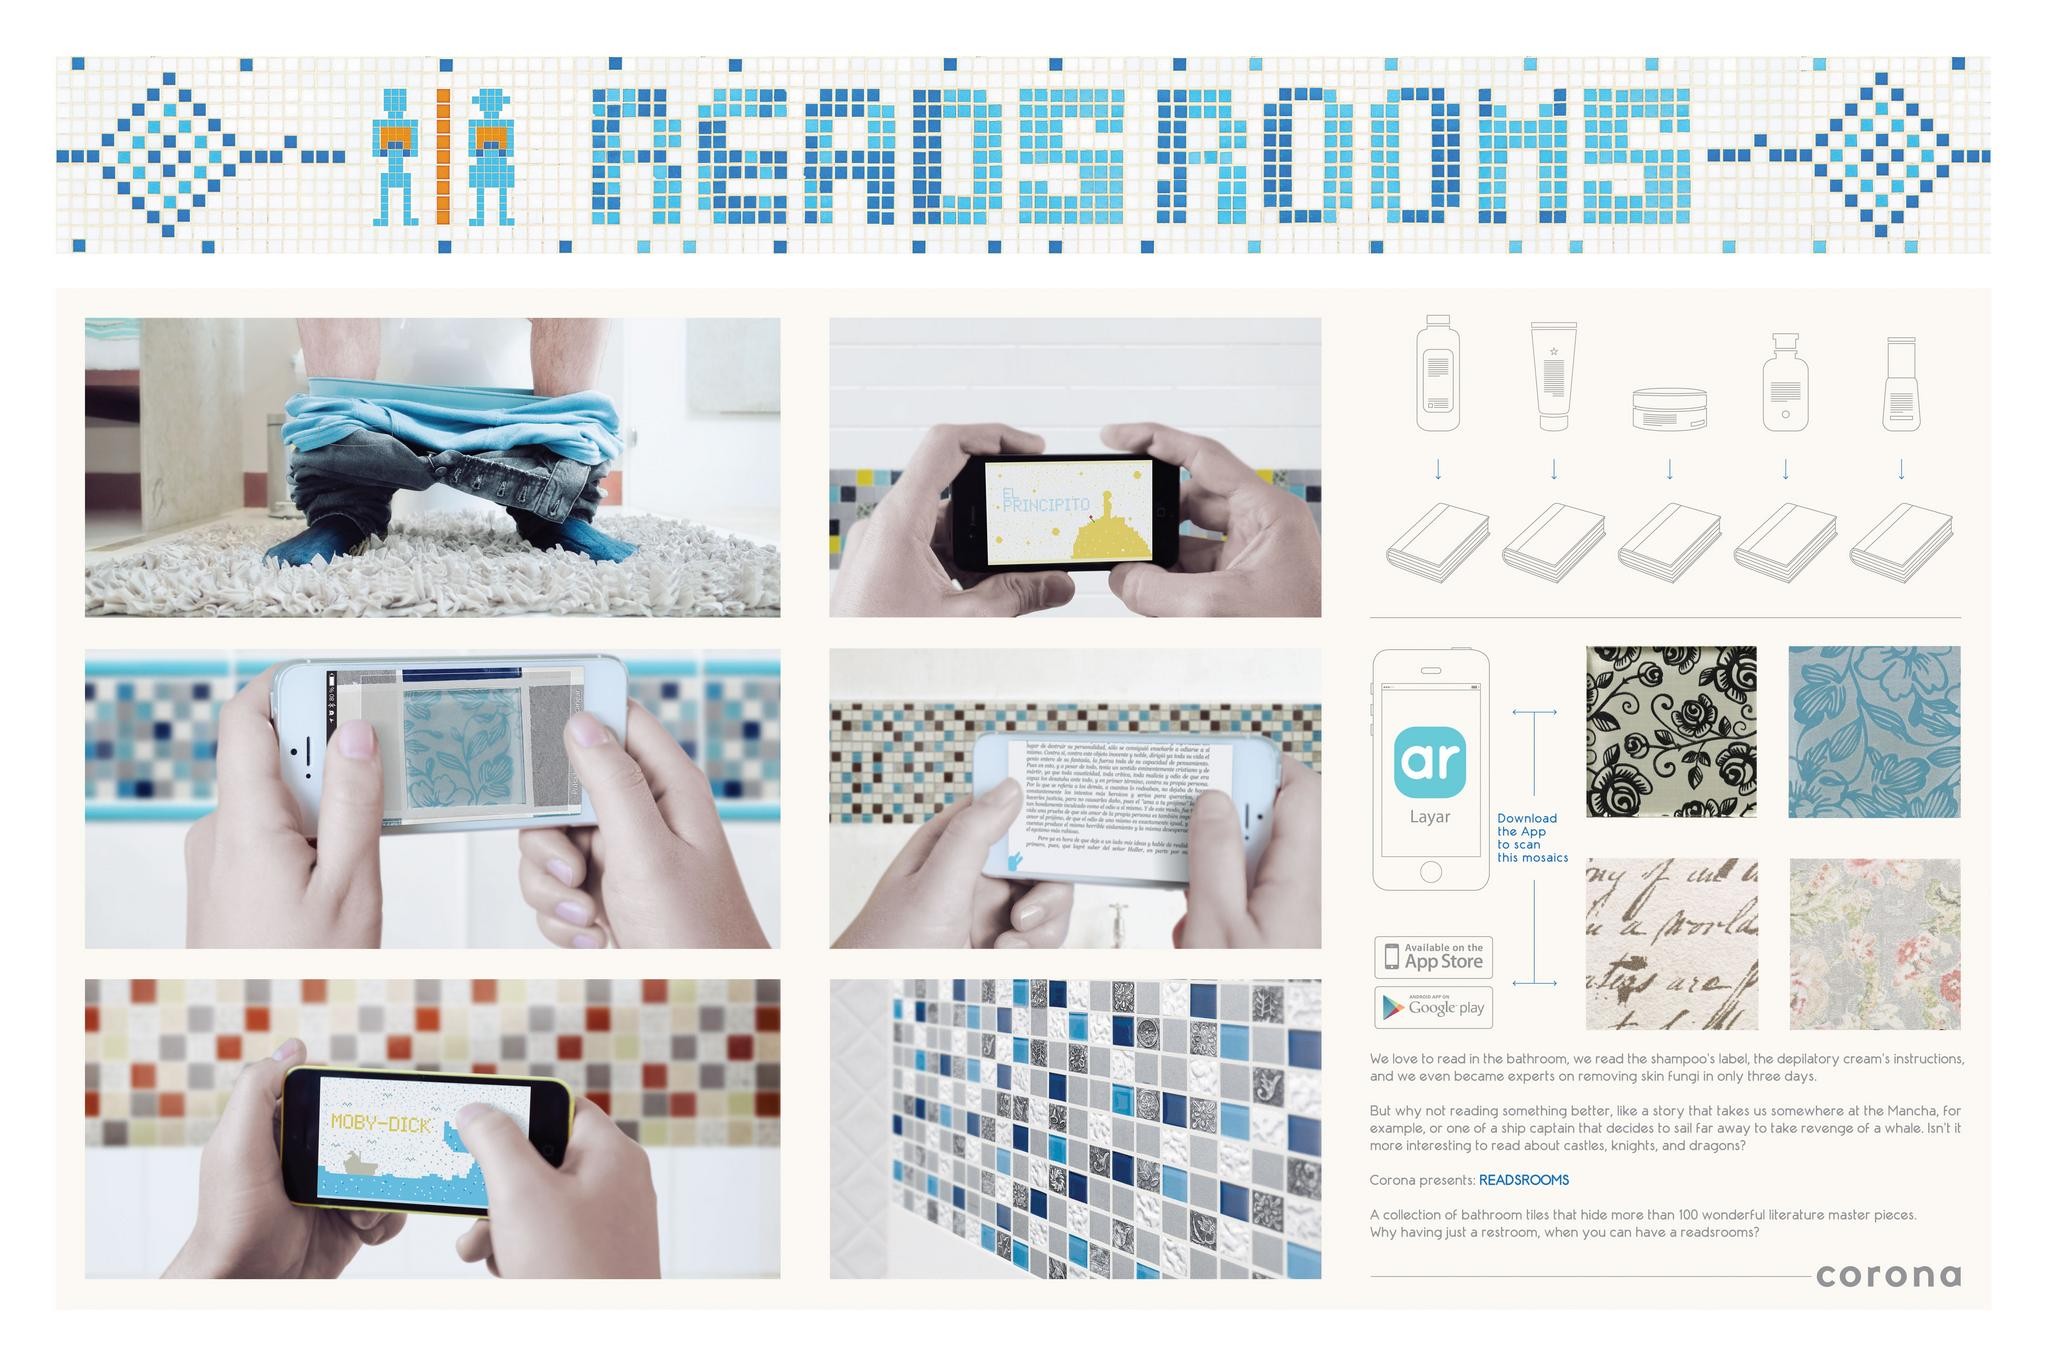 READSROOMS